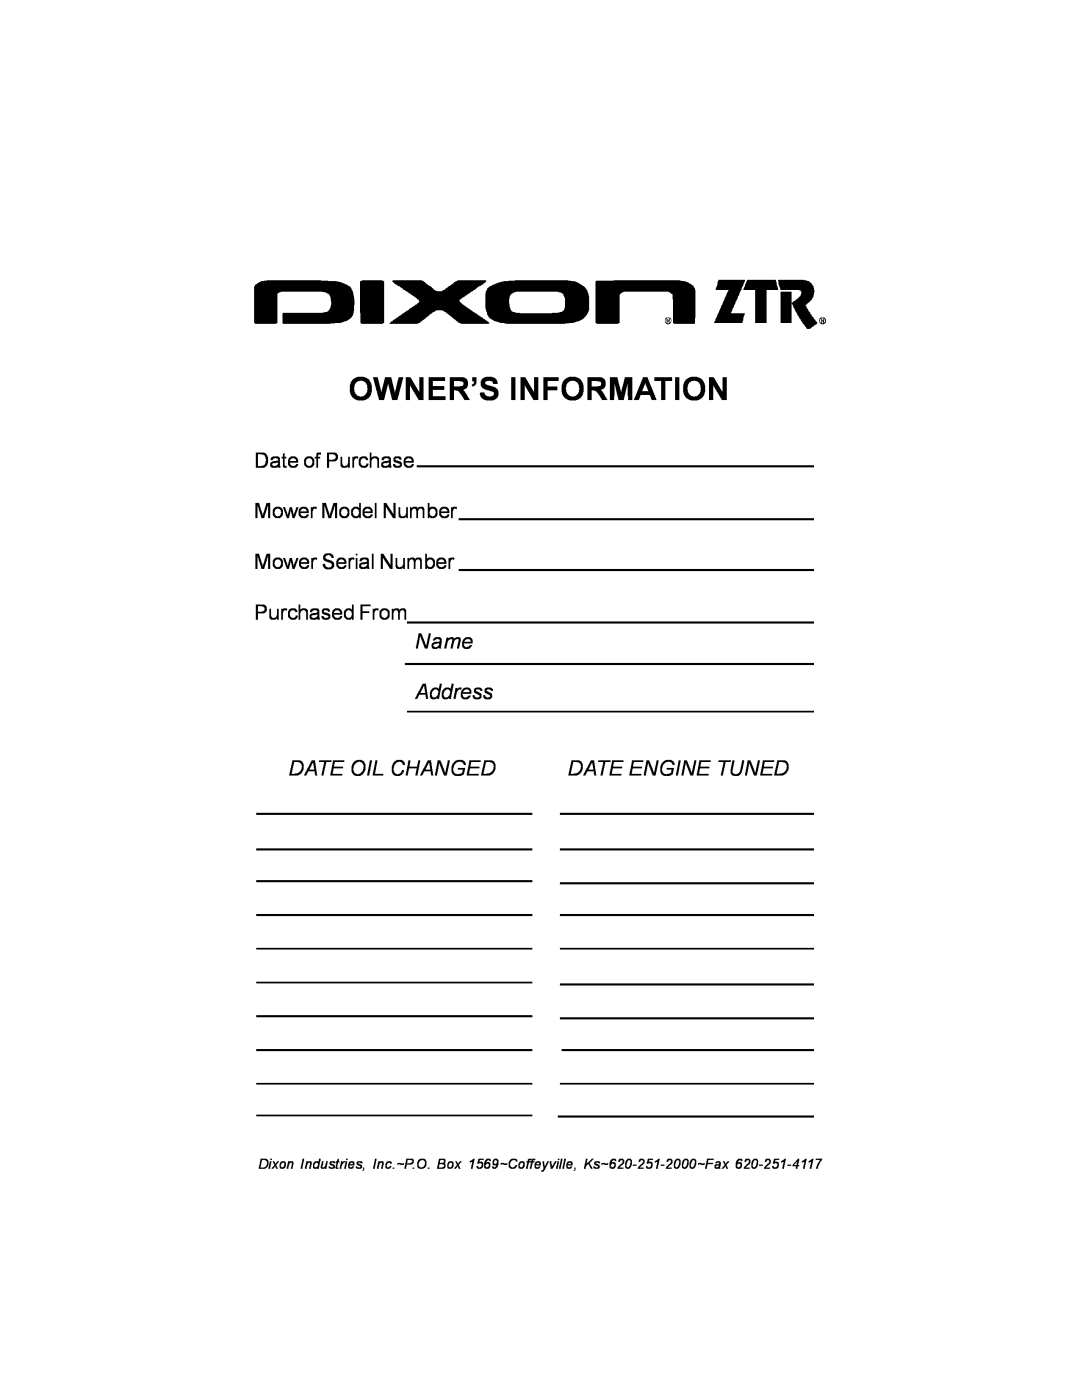 Dixon 36 manual Owner’S Information, Name Address, Date Oil Changed, Date Engine Tuned 